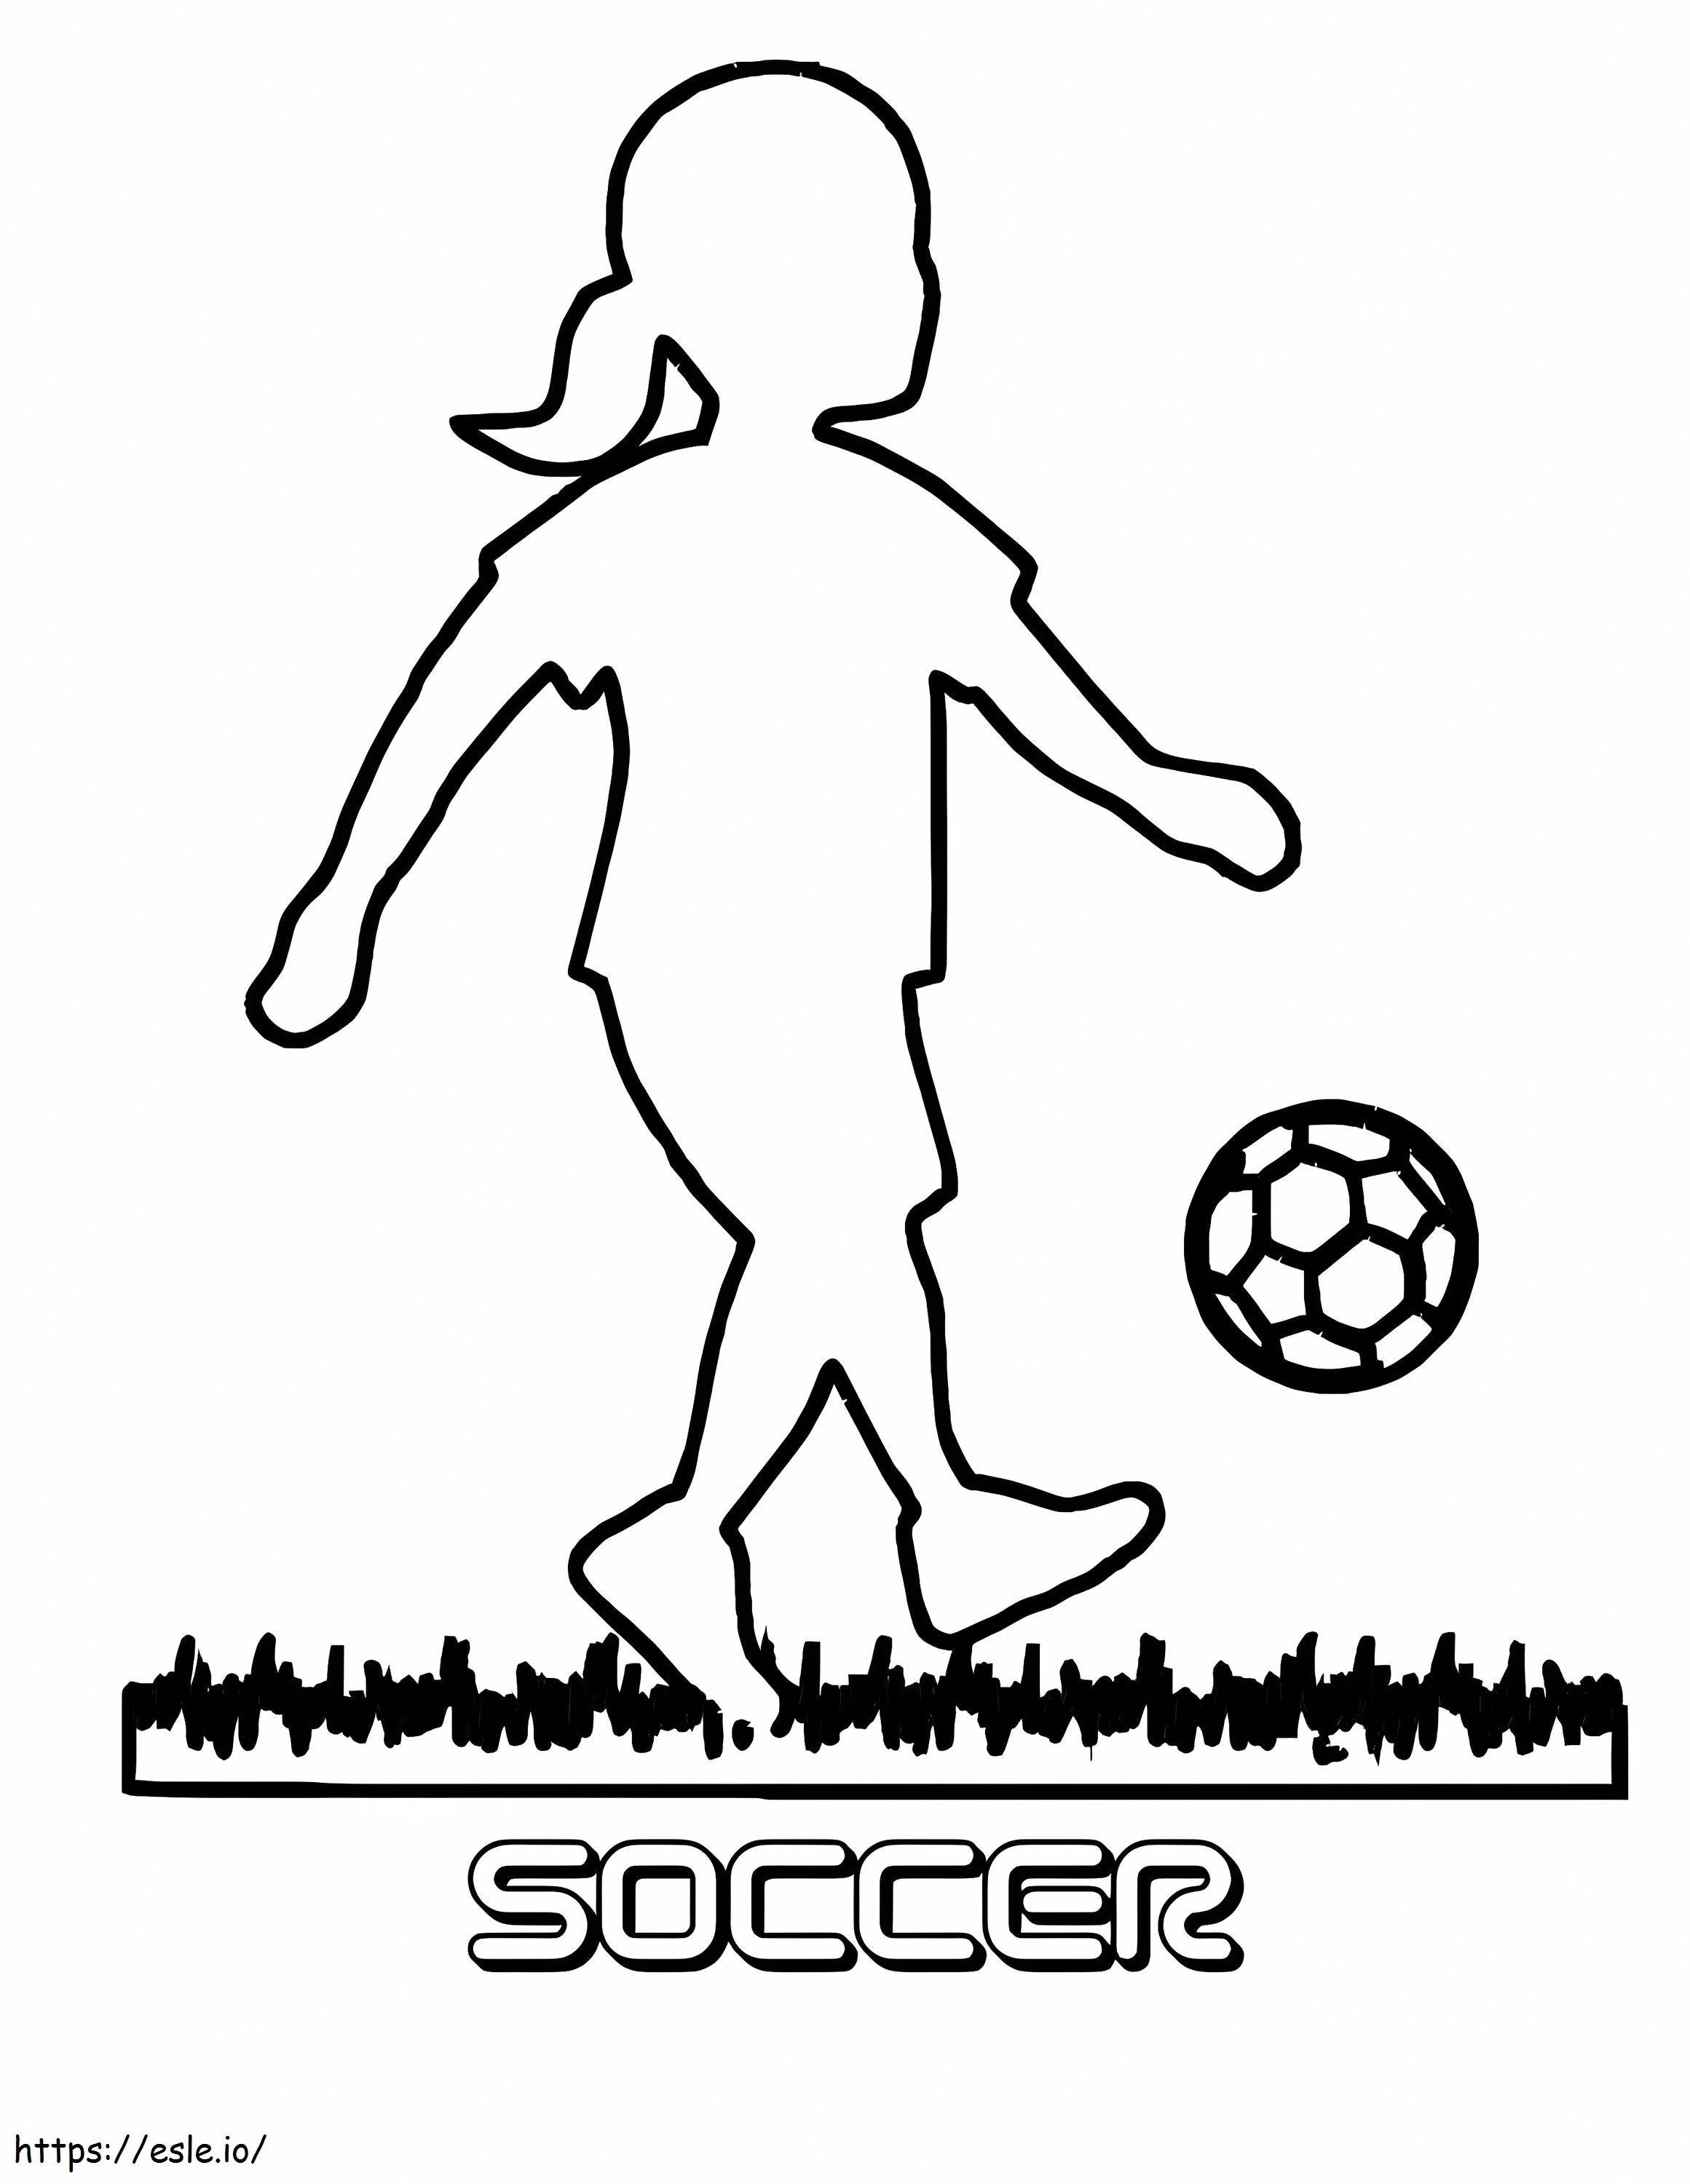 Soccer Player Outline coloring page